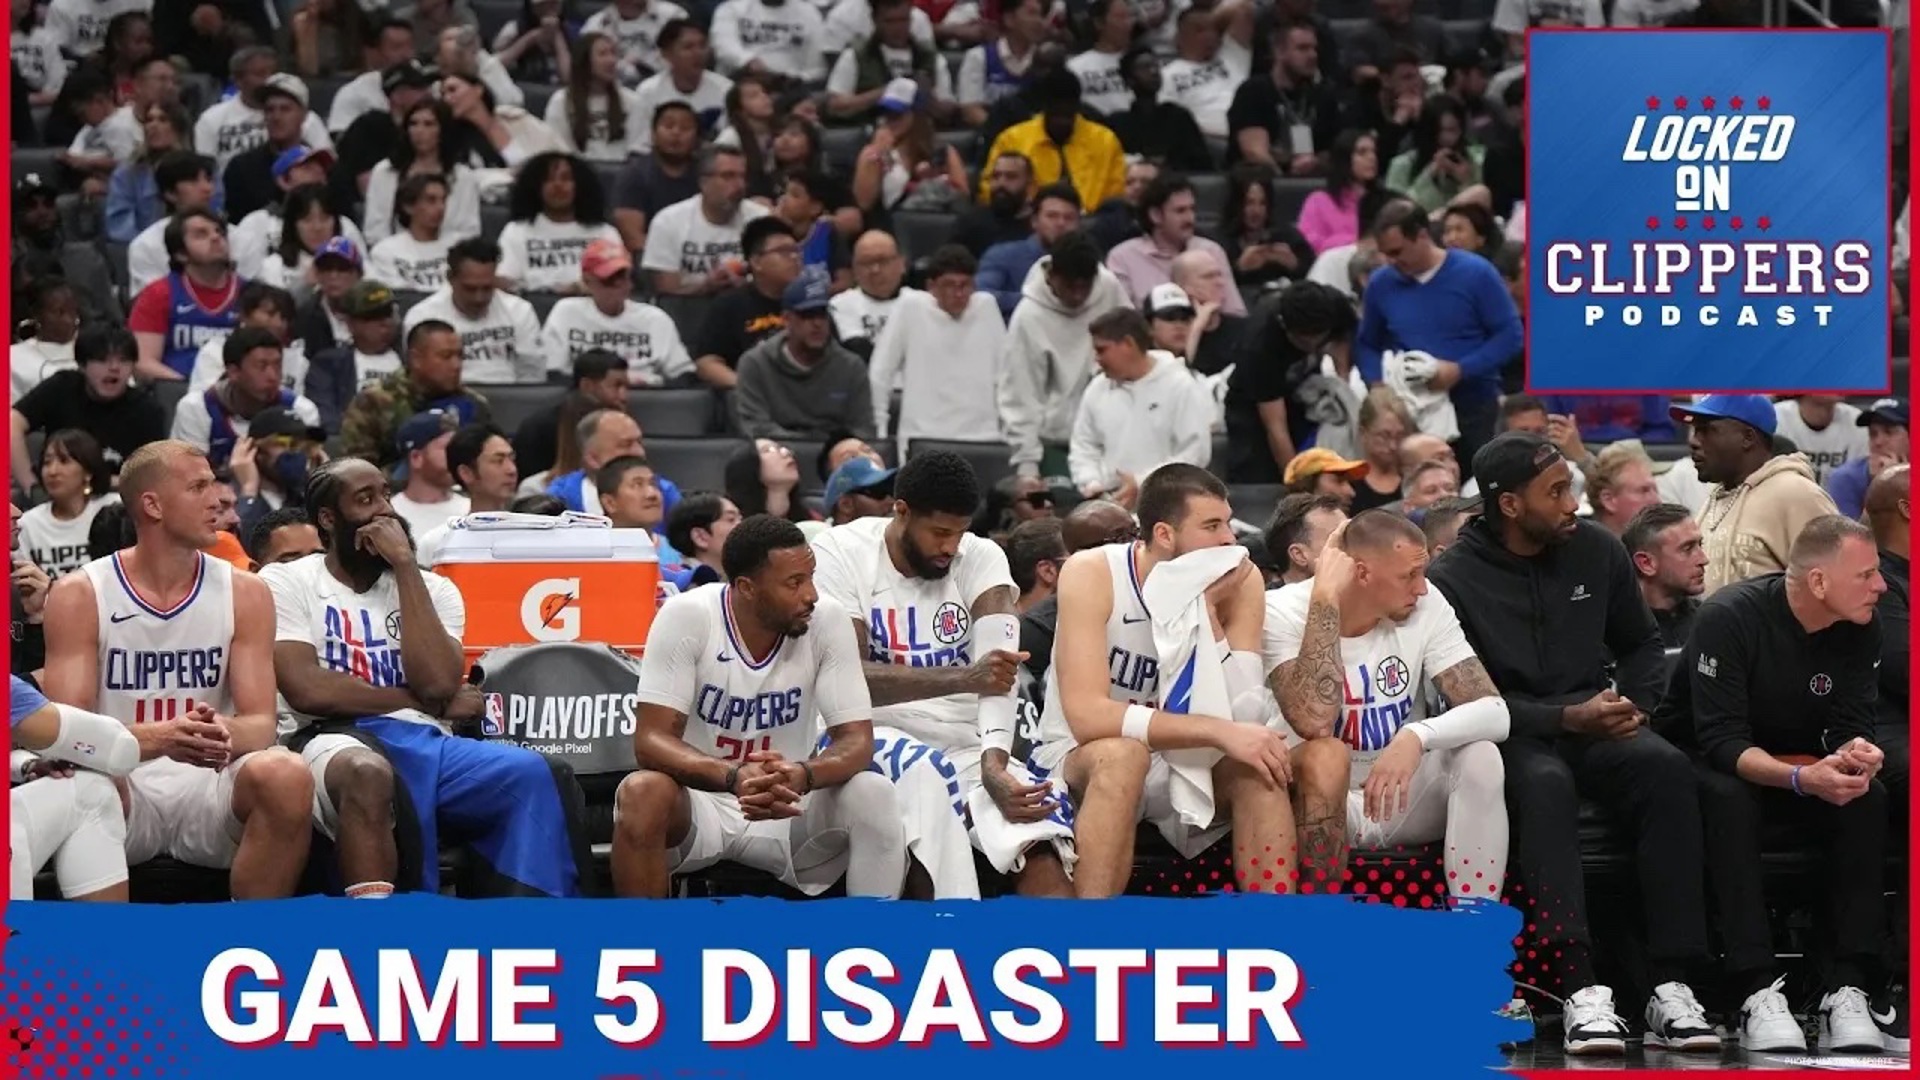 How The Clippers Suffered Their Worst Ever Playoff Defeat